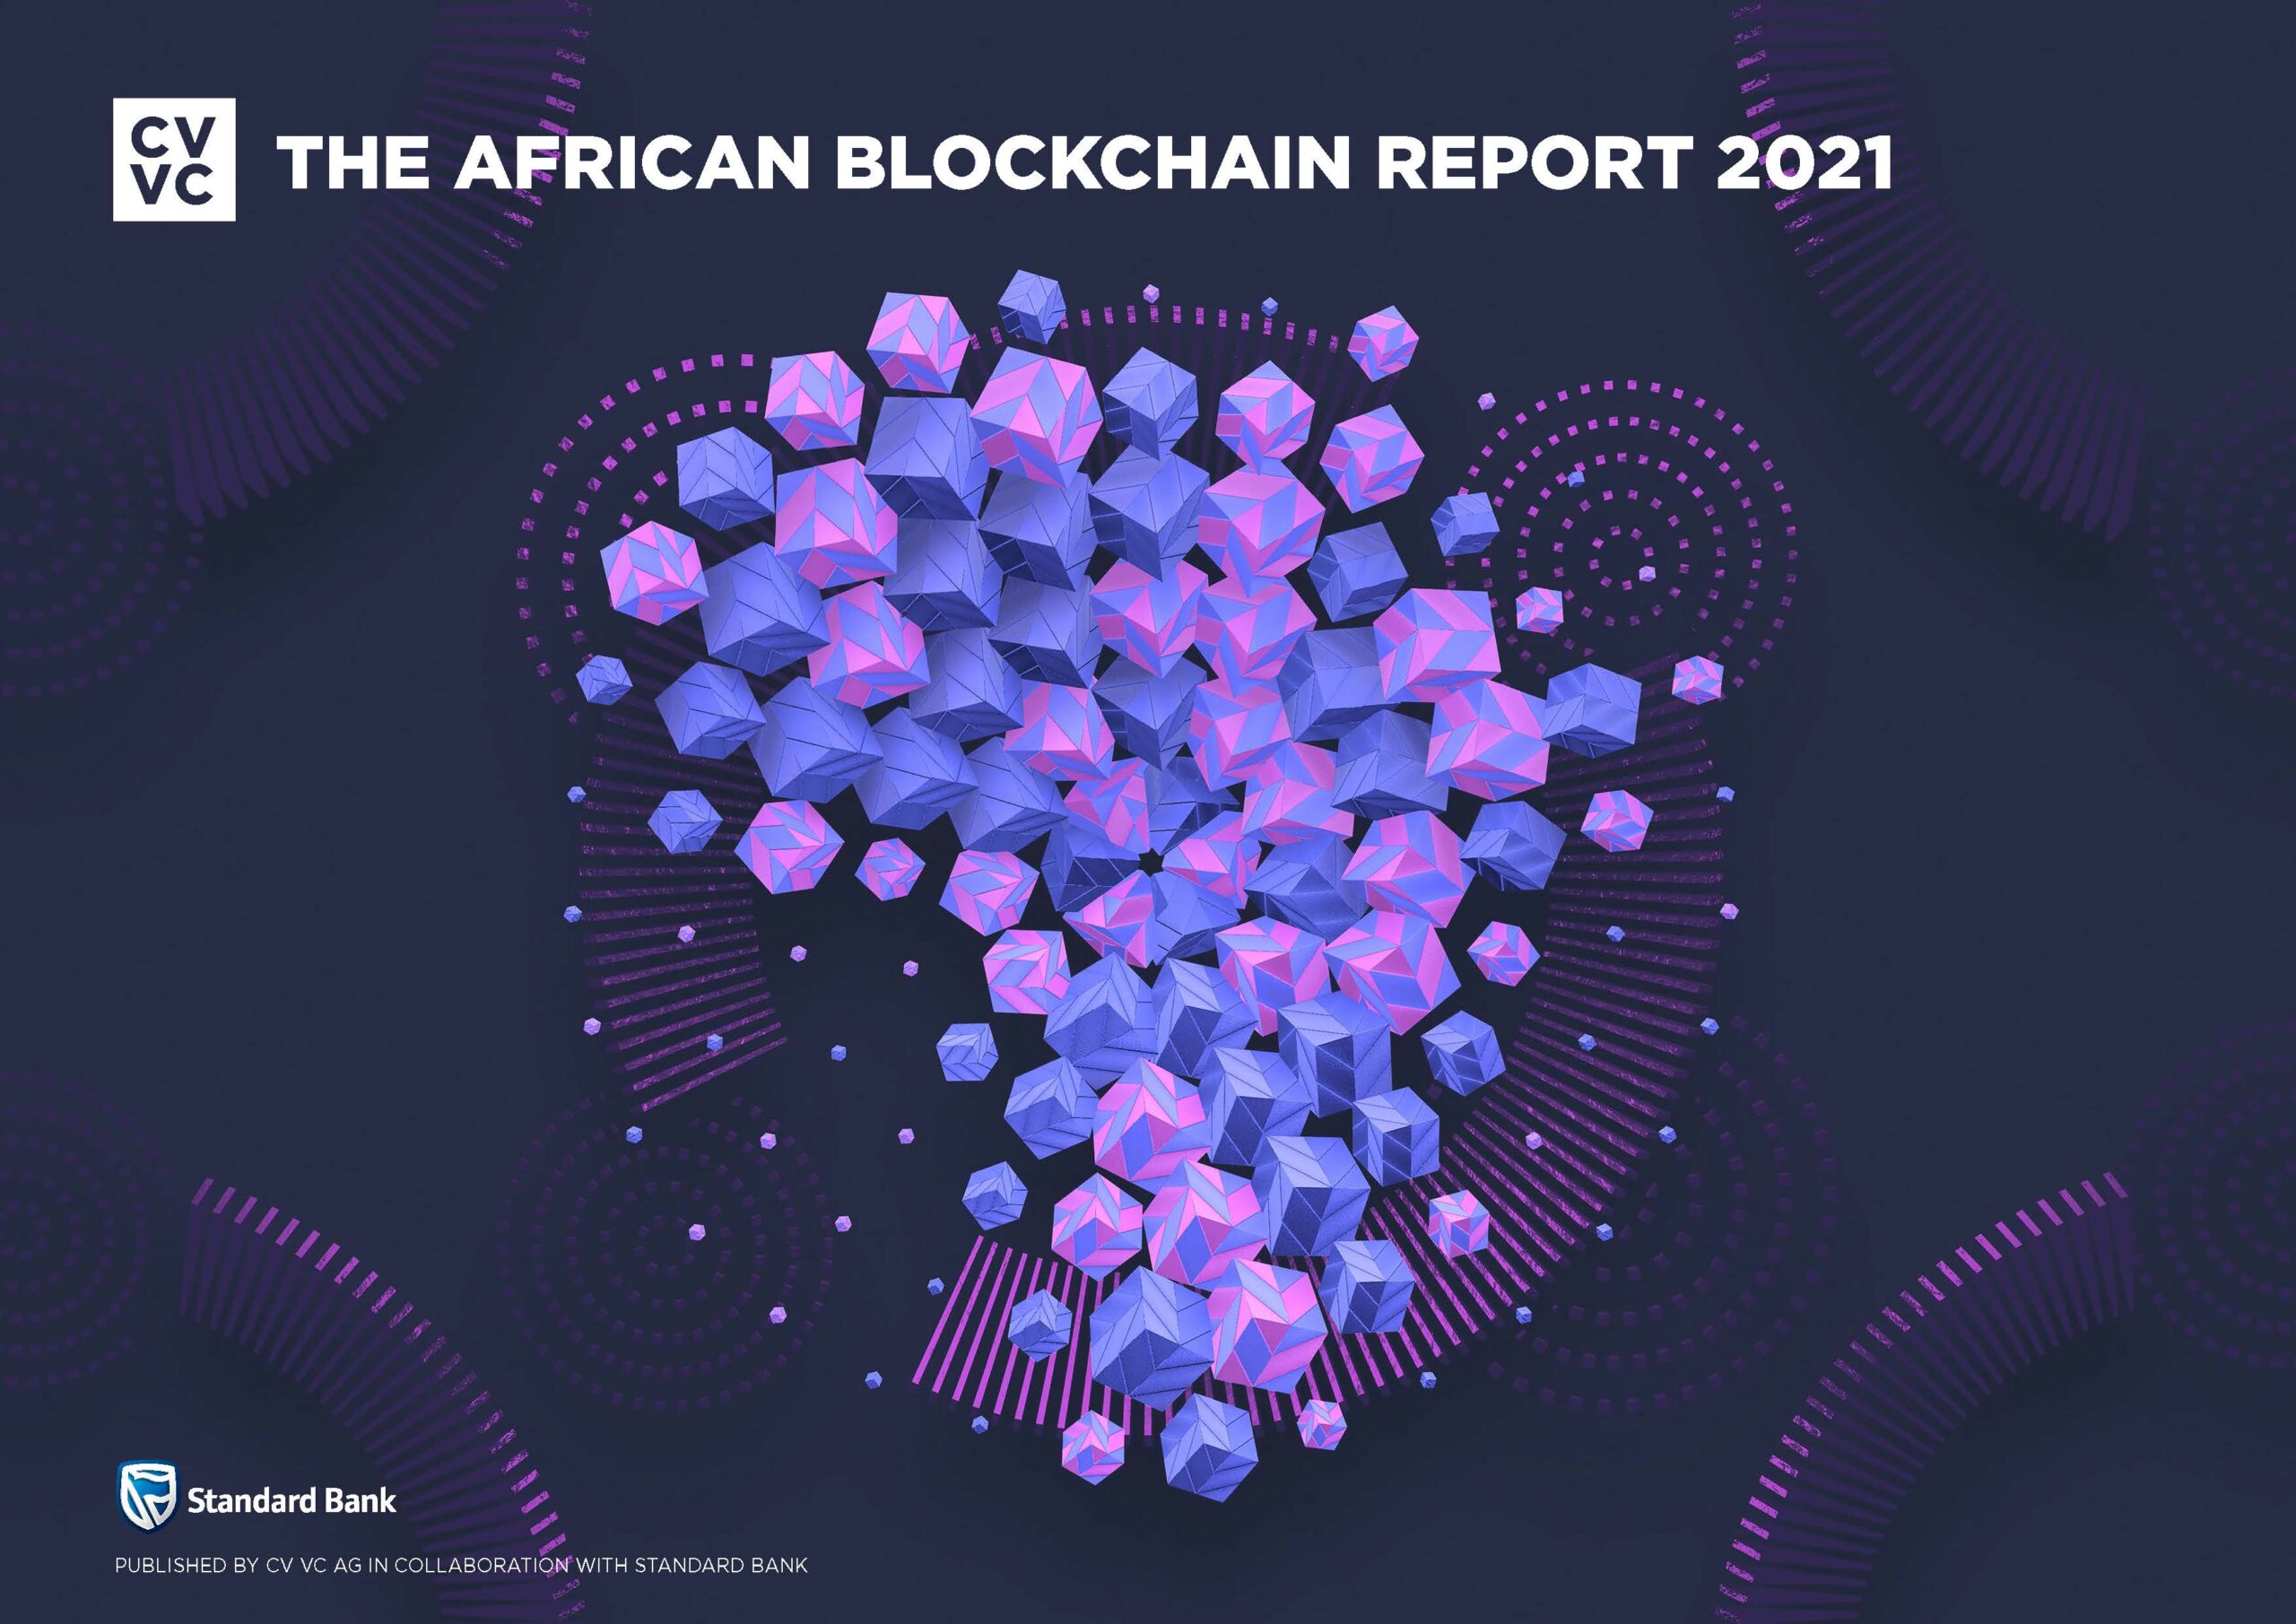 VC Funding for African Blockchain Startups Shoots by 1,668%